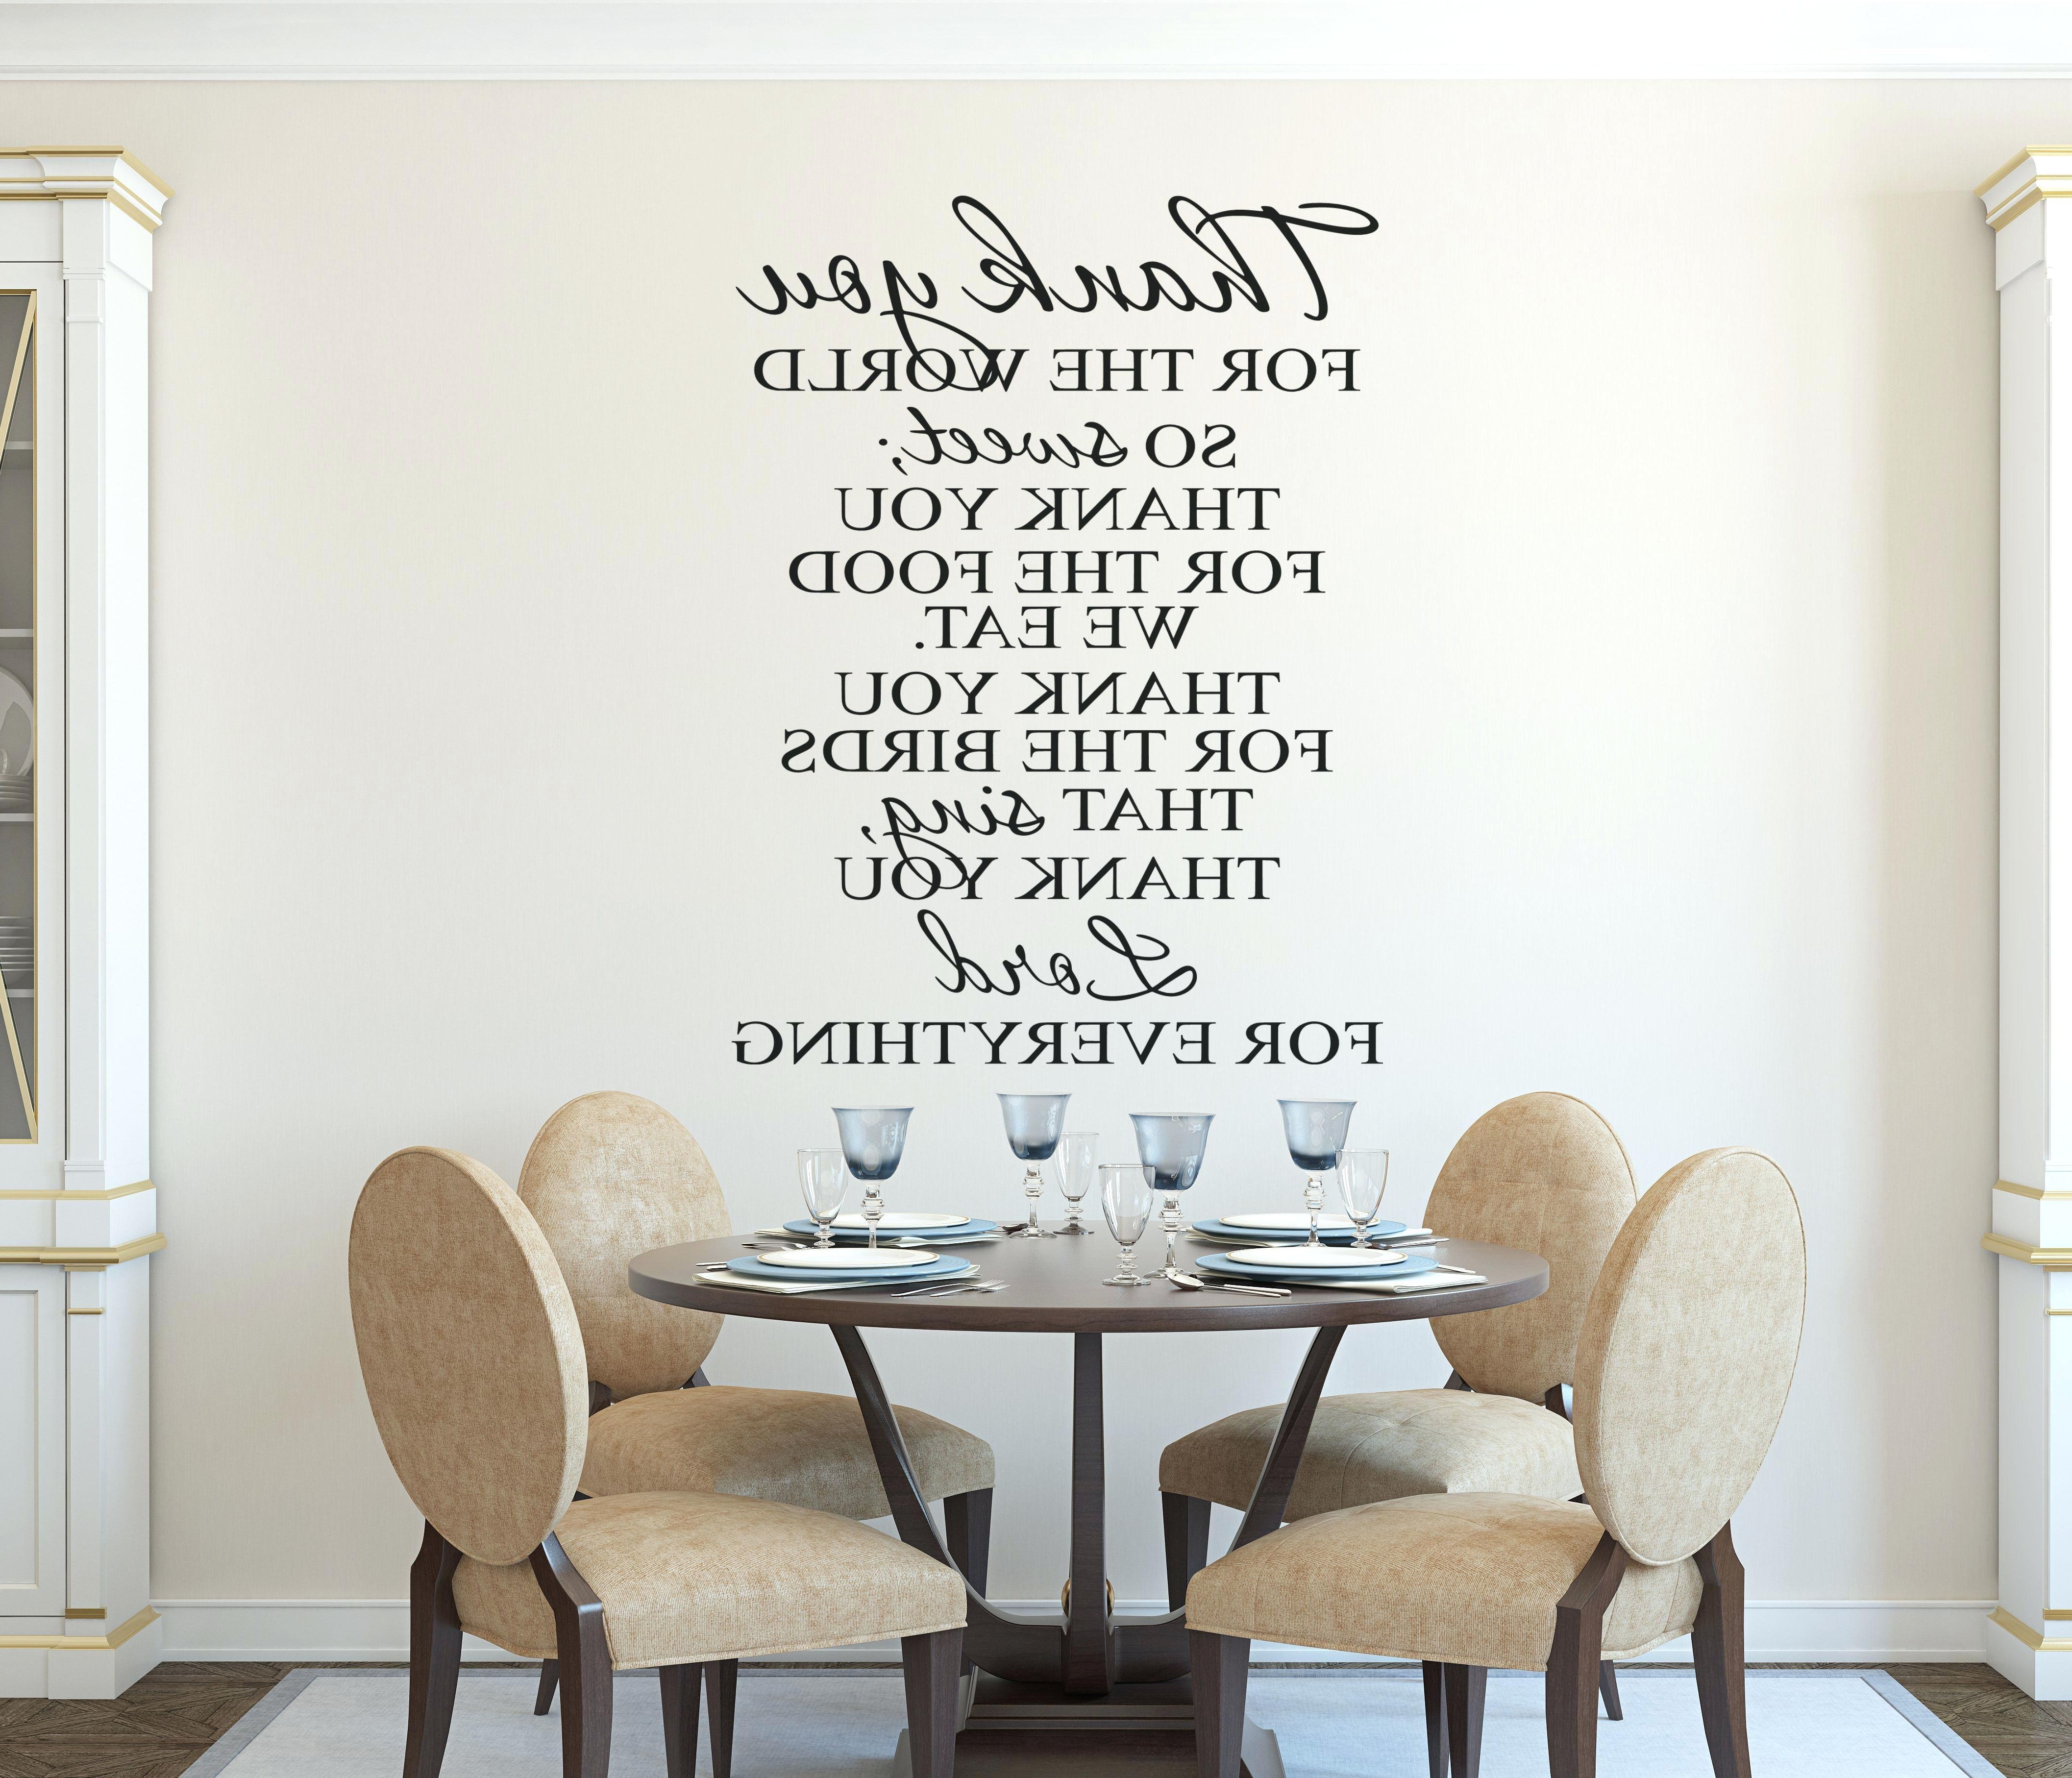 Wall Word Art Decals Christian Wall Art Kitchen Prayer Wall Decal In Well Liked Christian Word Art For Walls (View 11 of 15)